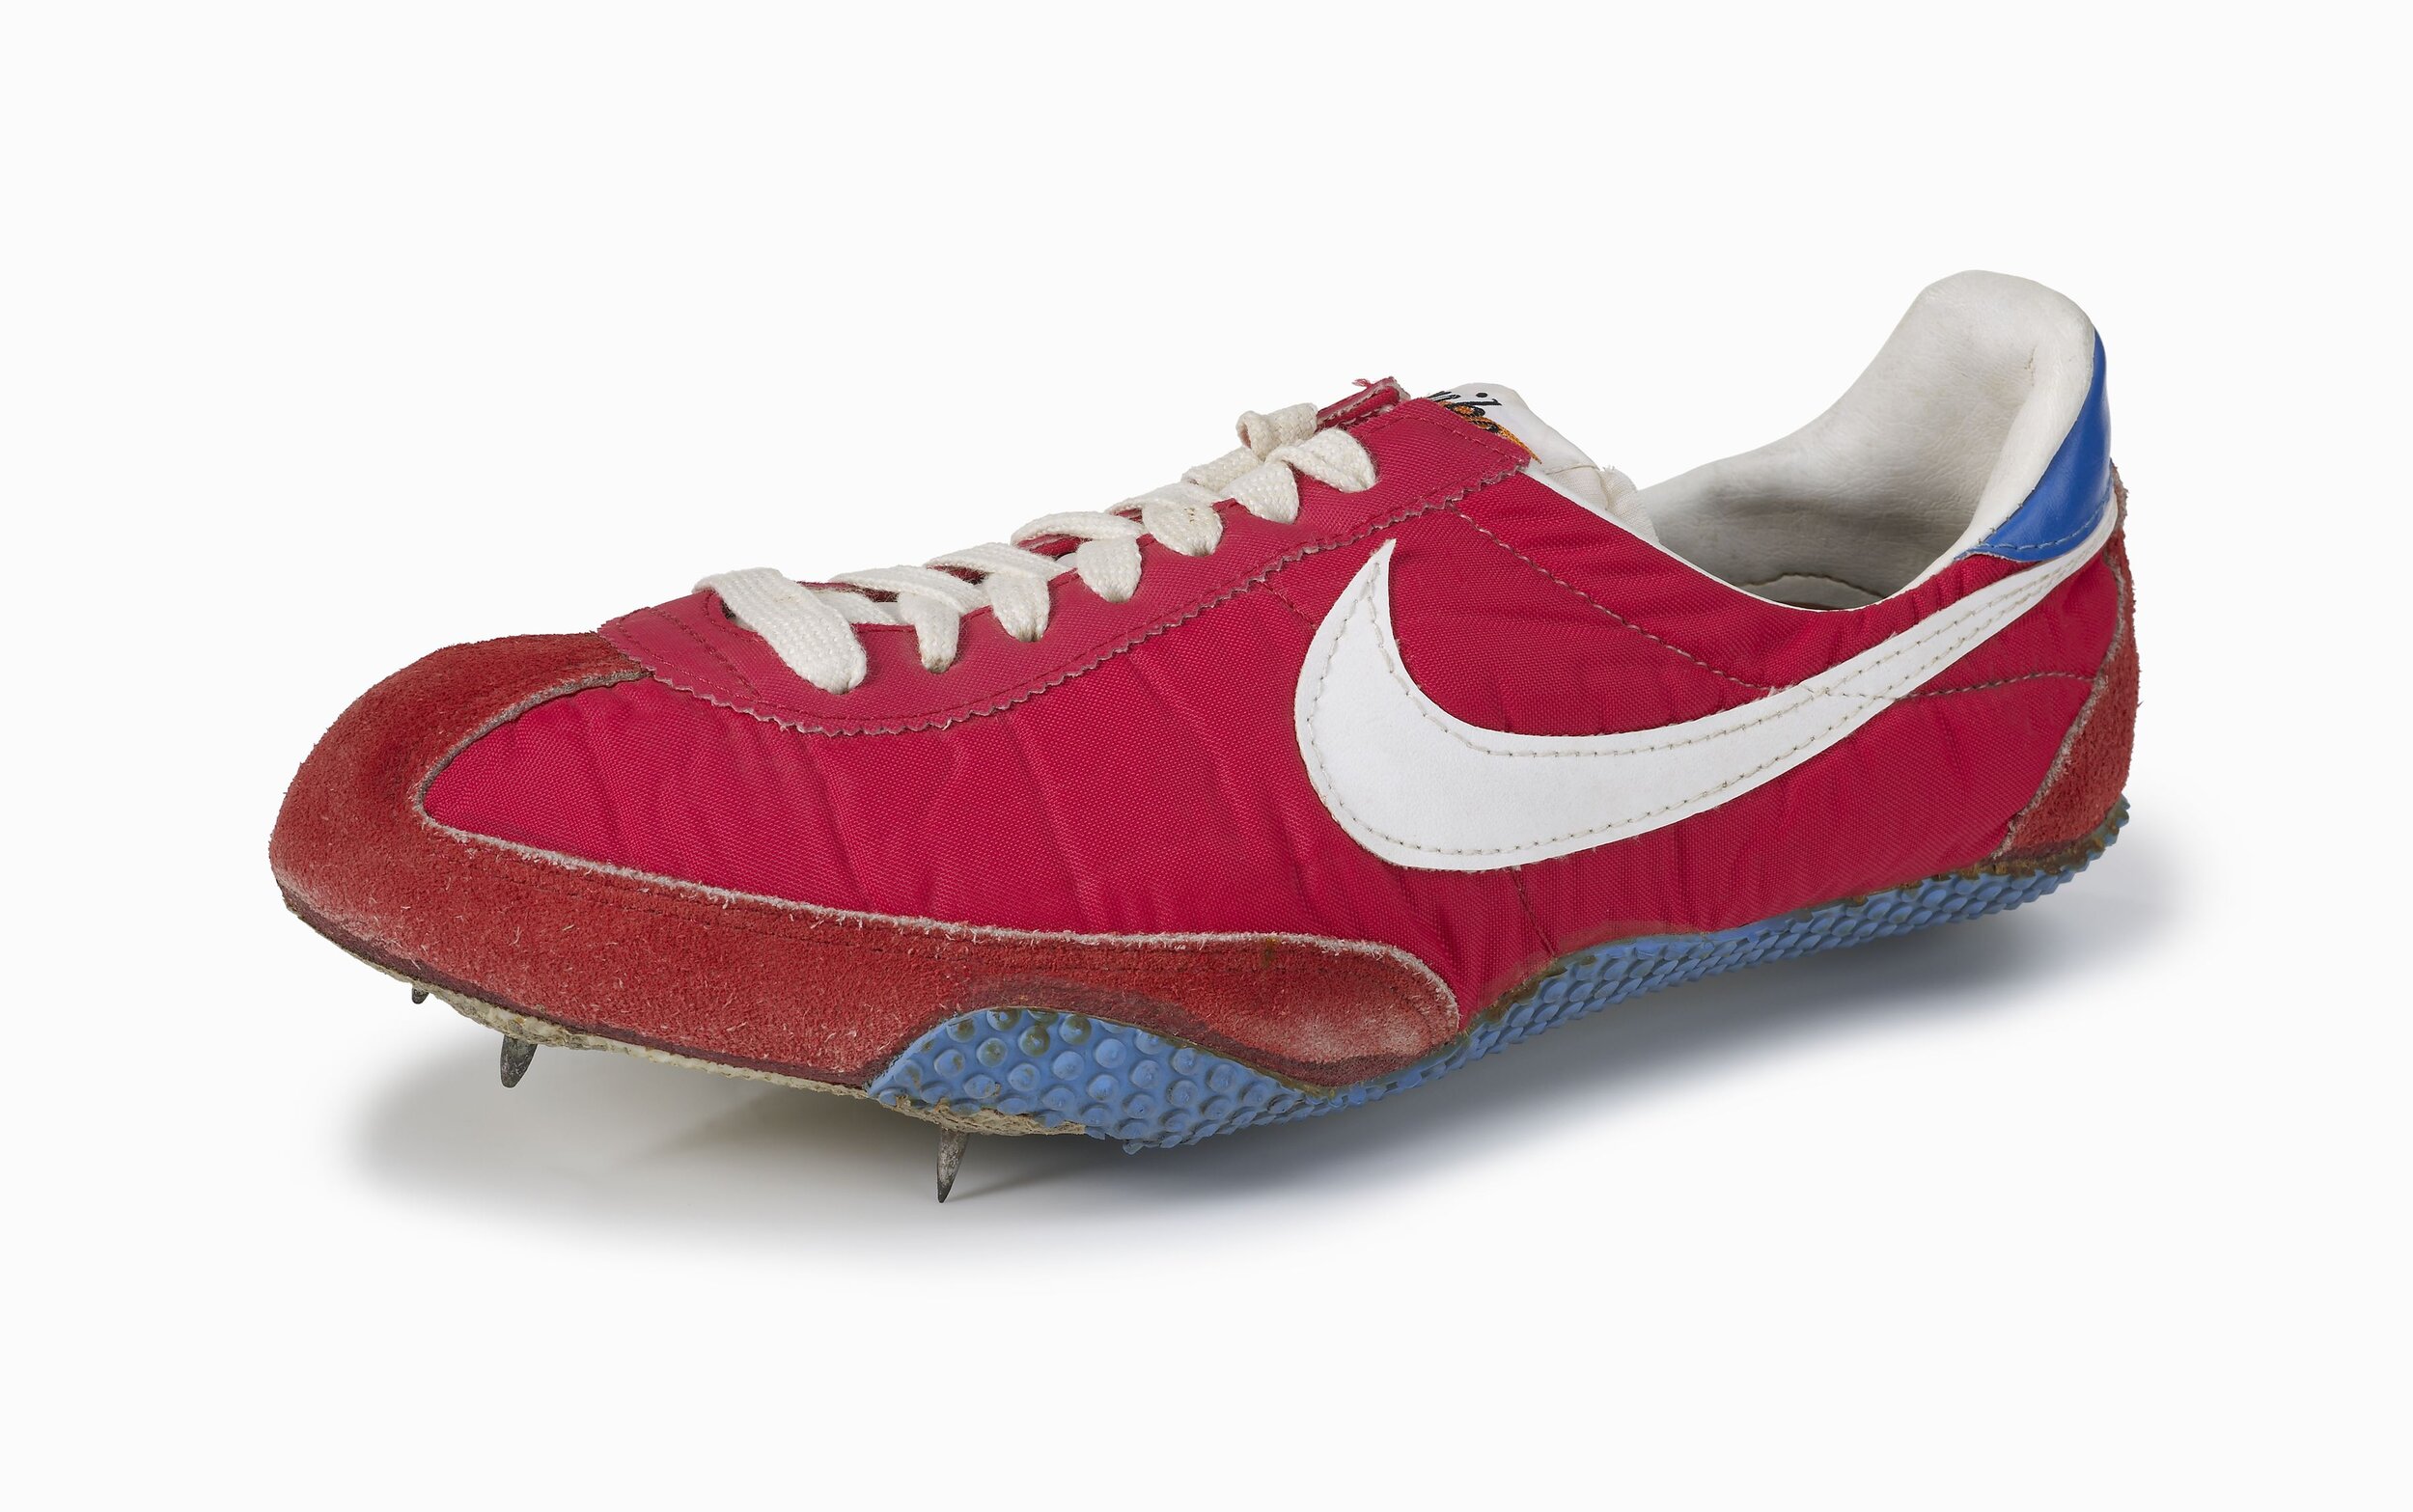 the nike air zoom viperfly